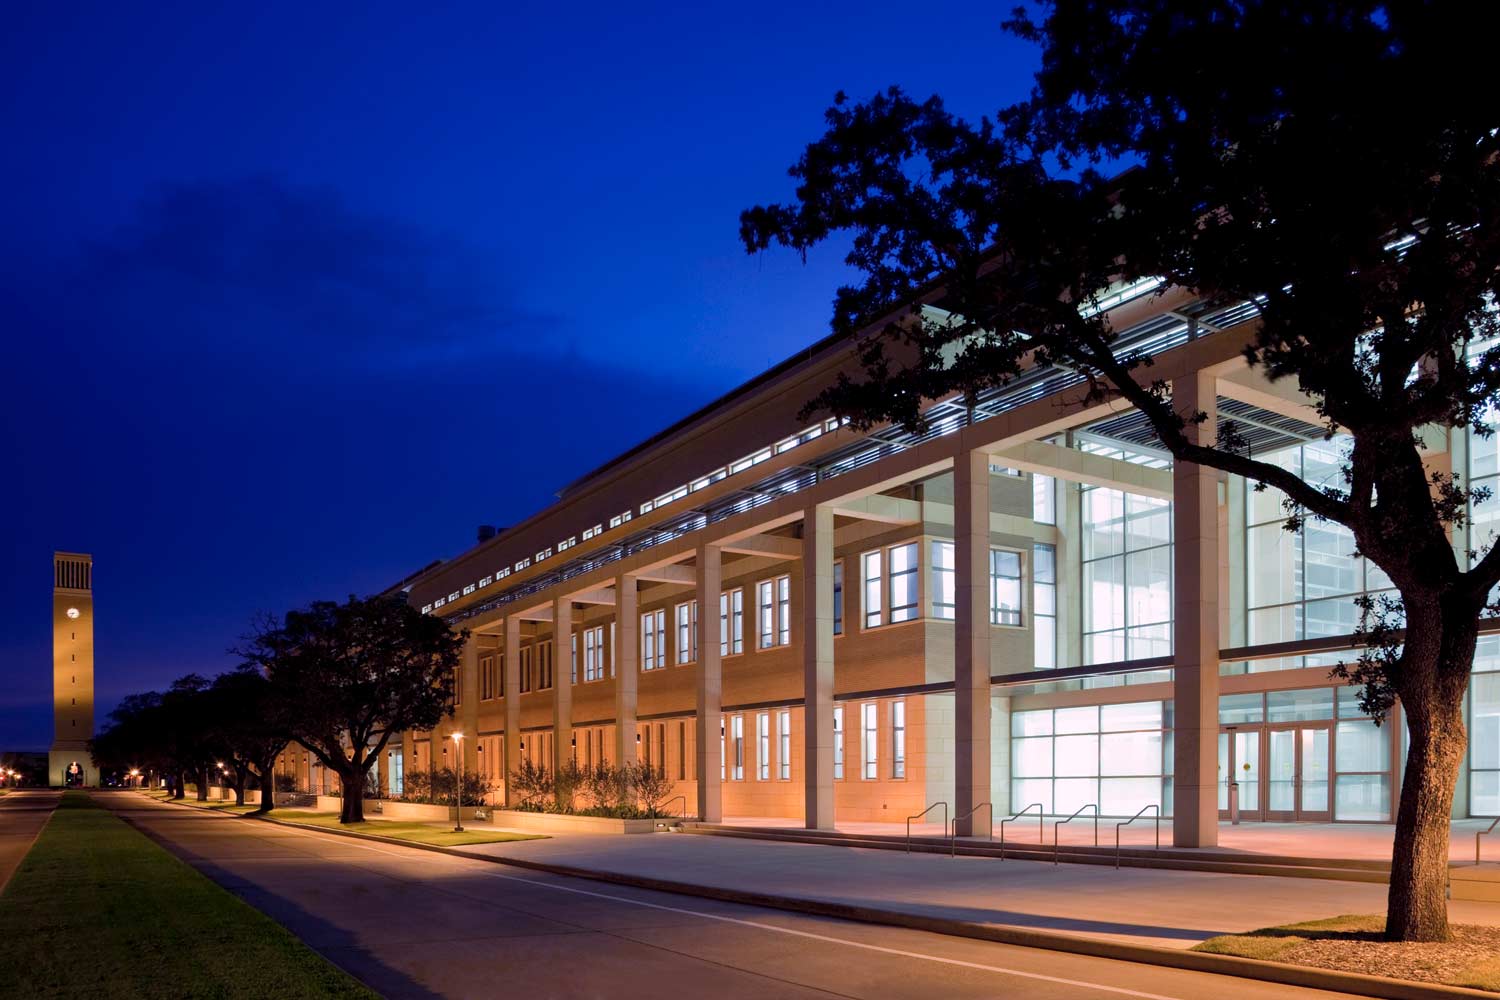 The ILCB building at night - housing the Interdisciplinary and Life Sciences research facilities